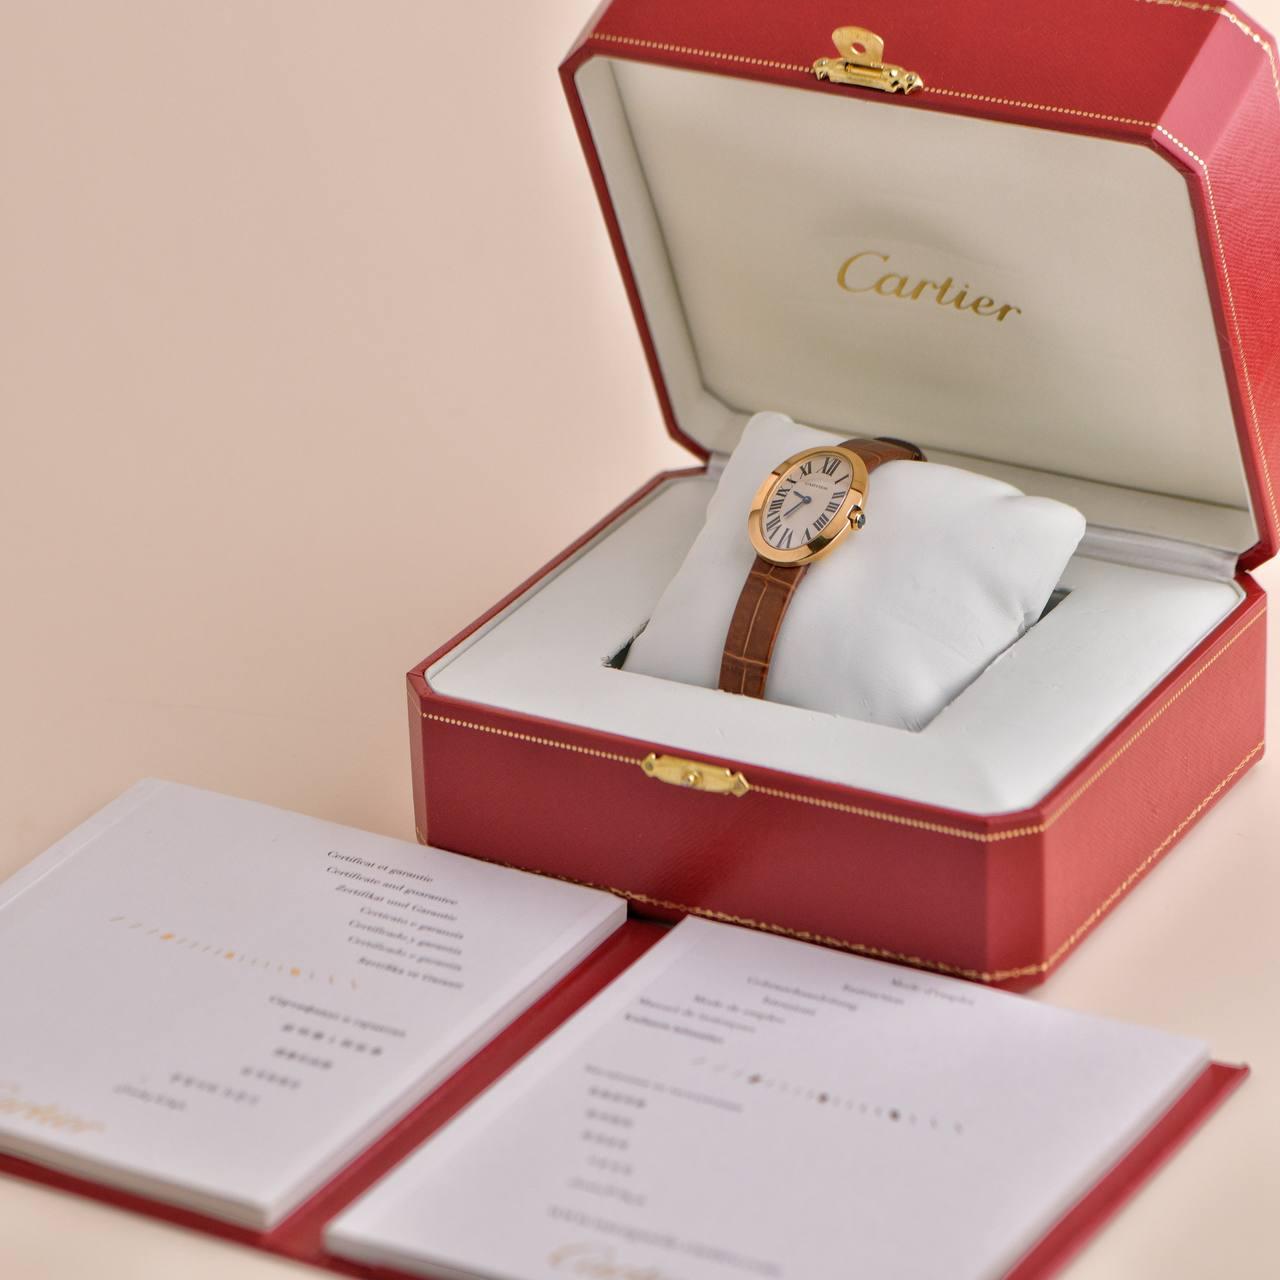 SKU.        AT-1779
Brand	Cartier
Model No.	W8000009
Serial No.	10******3208
Gender	Women/Unisex
Box/Papers	Yes / Yes
RRP: £10,500 incl. VAT / $11,000 / €11 900 incl.